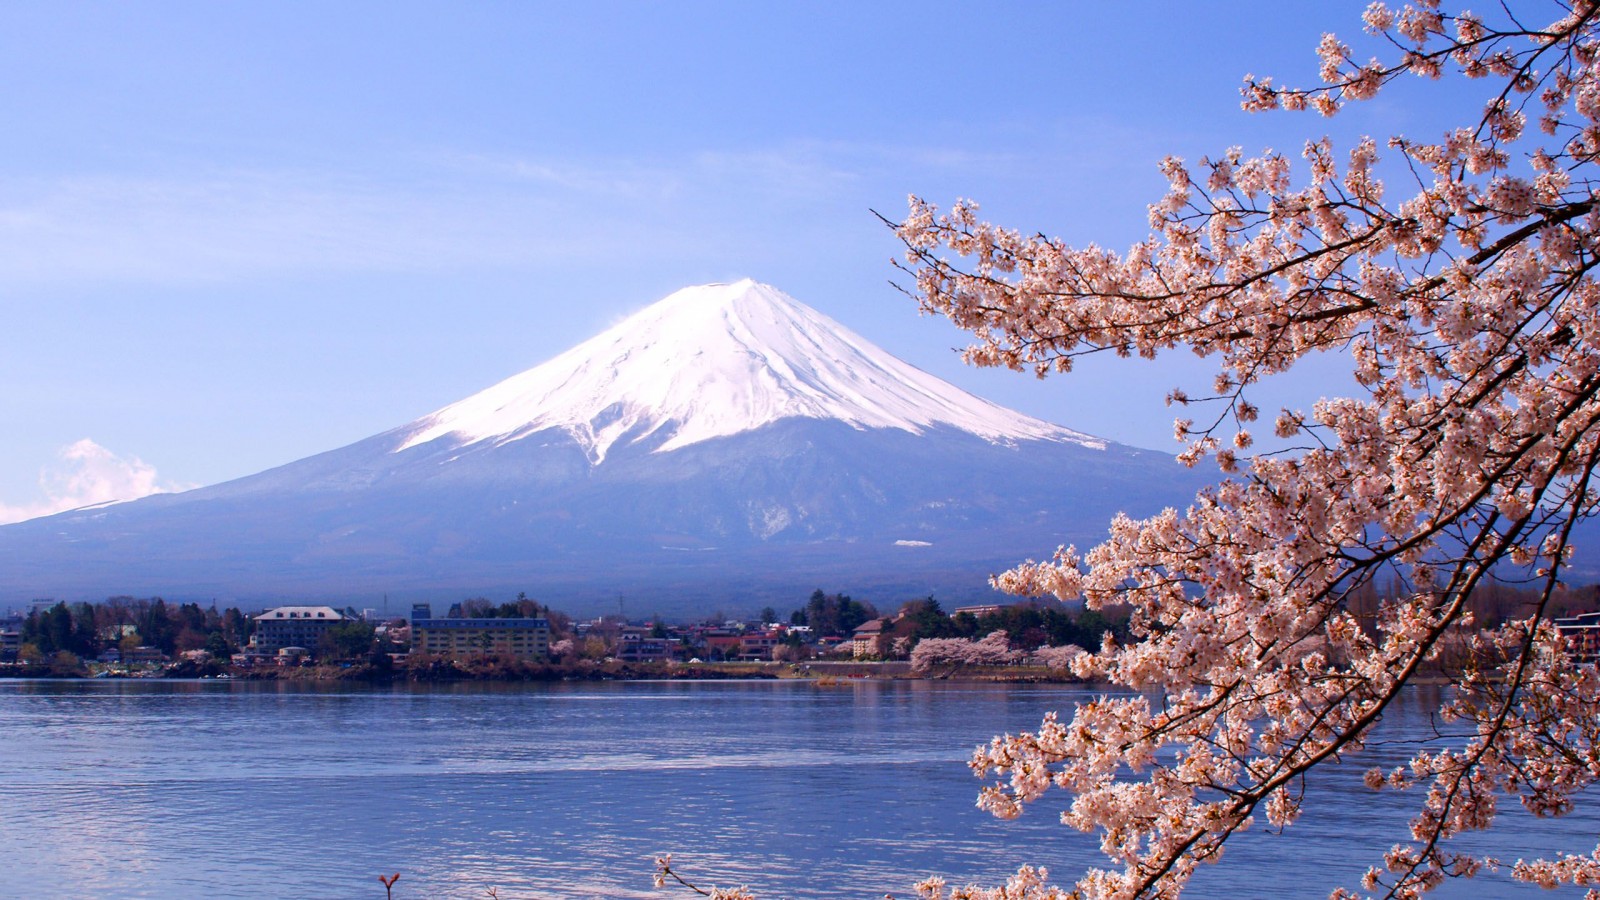 Japanese Landscape Pictures In High Definition Or Widescreen